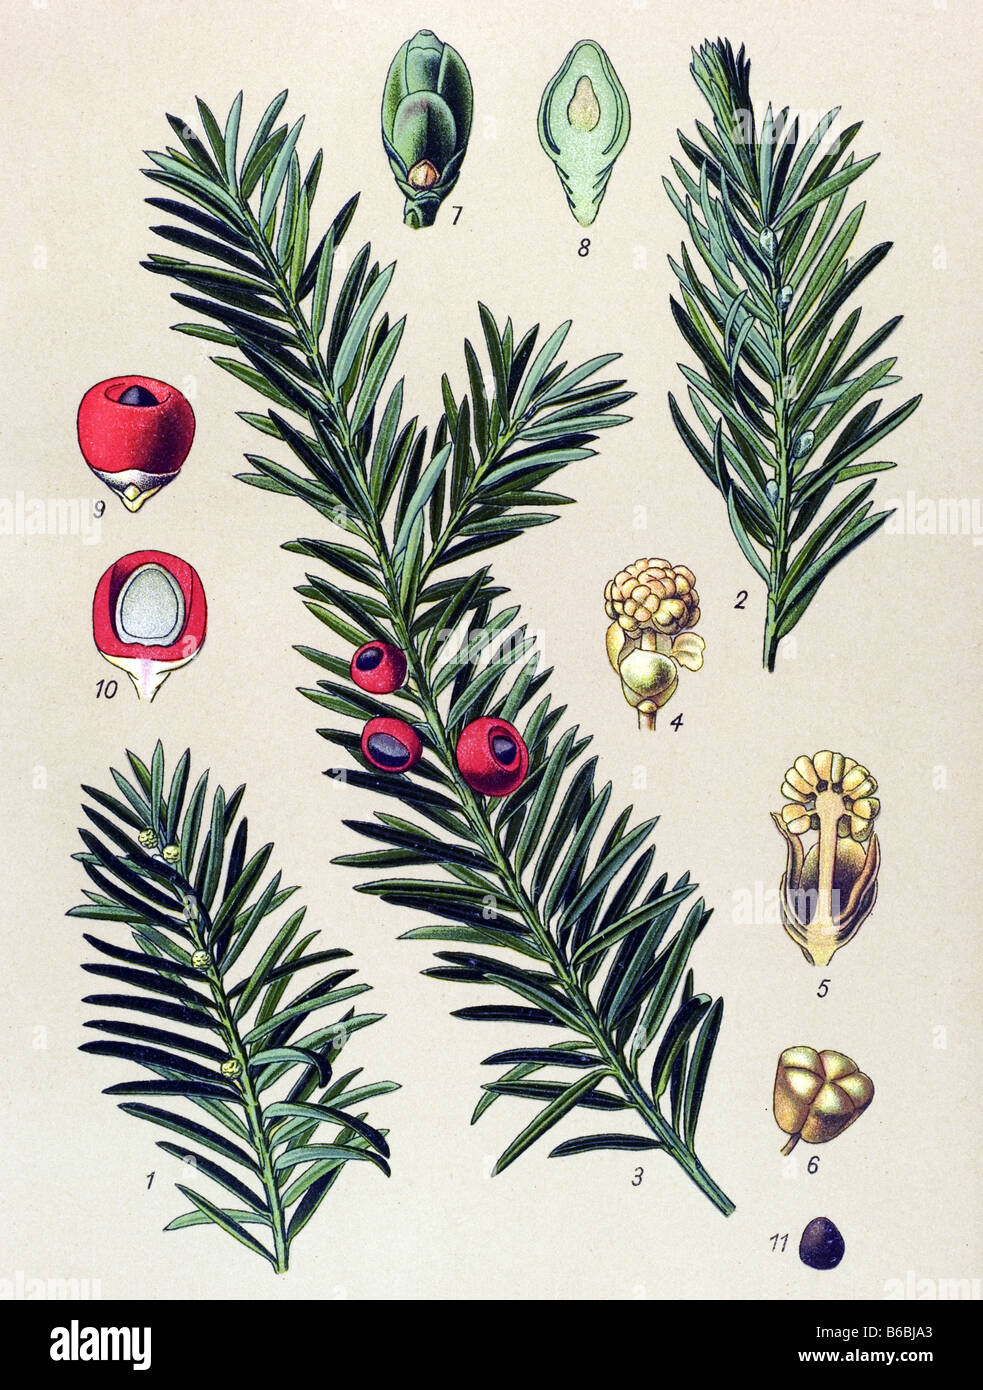 Yew, Taxus baccata, poisonous plants illustrations Stock Photo